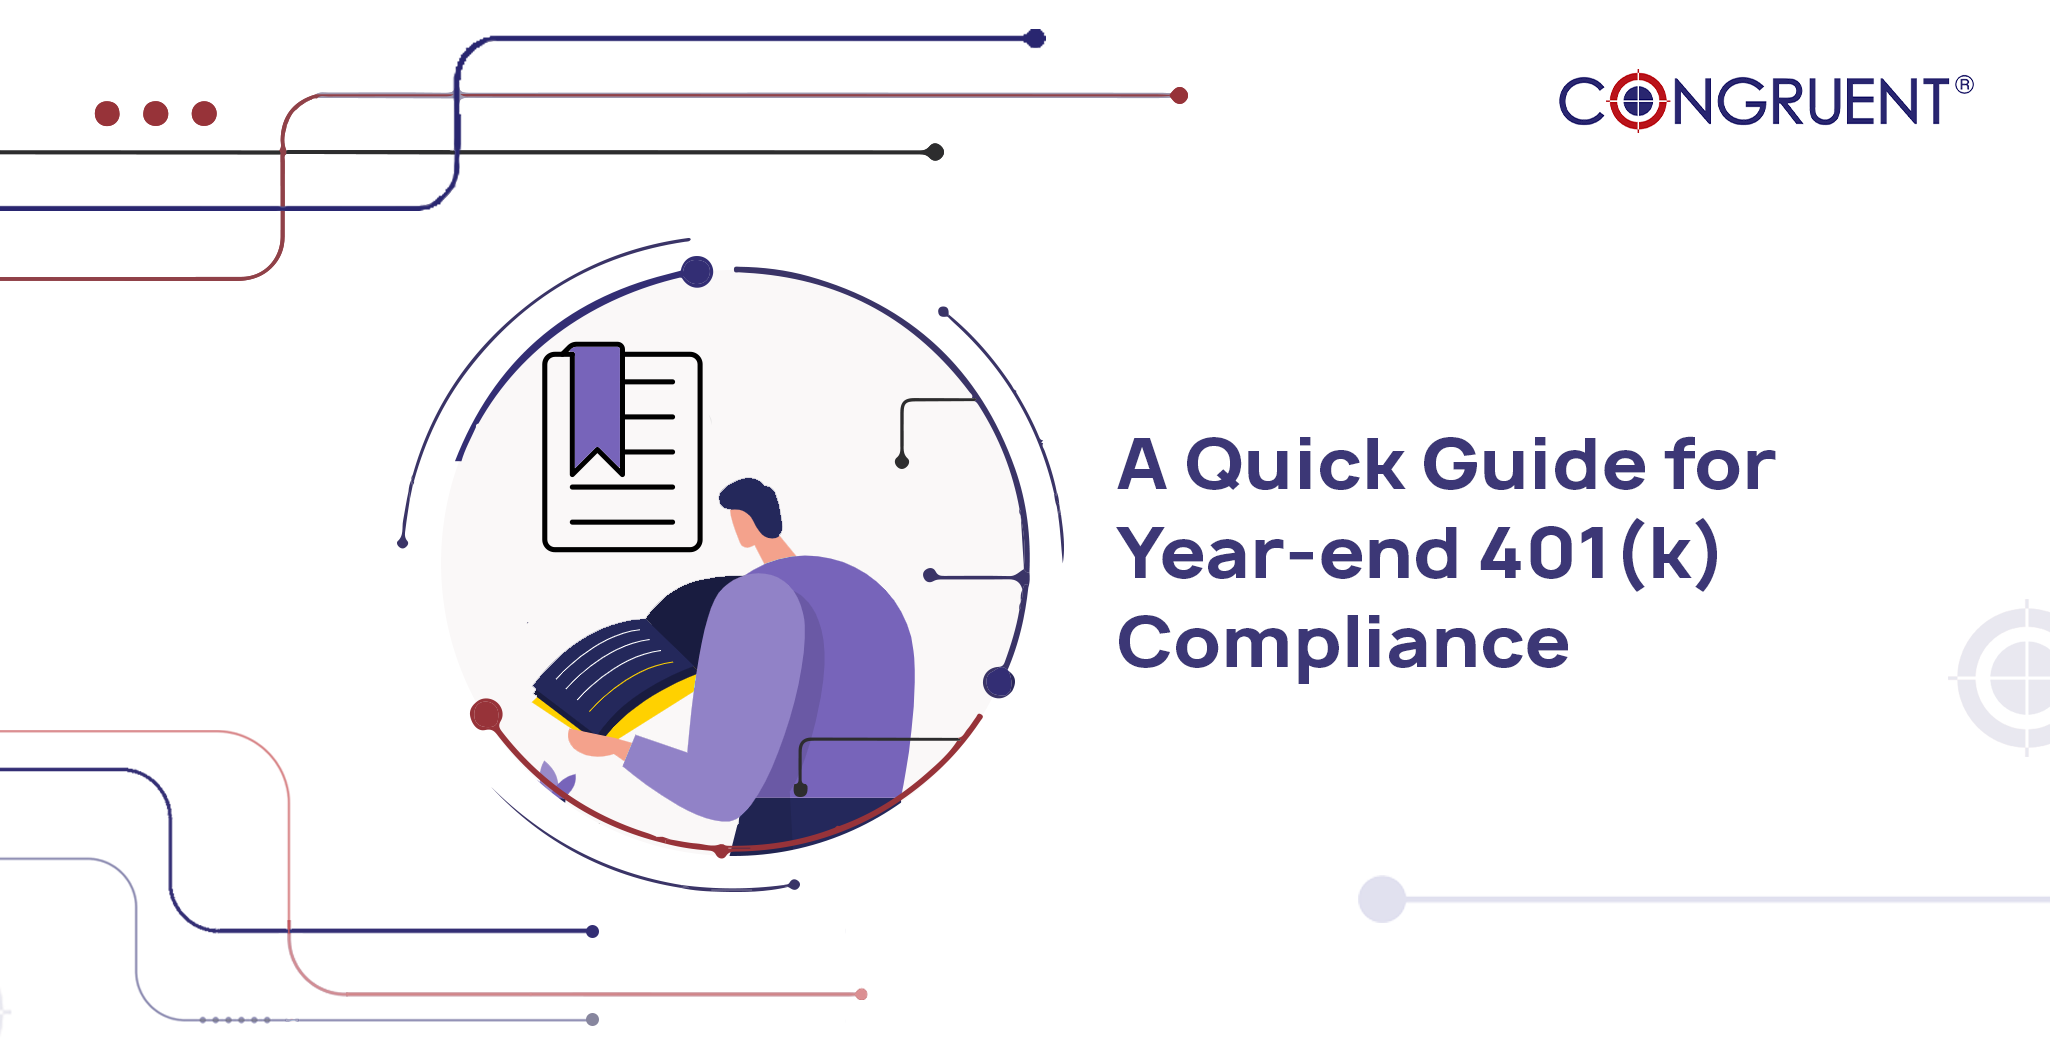 A Quick Guide for Year-end 401(k) Compliance